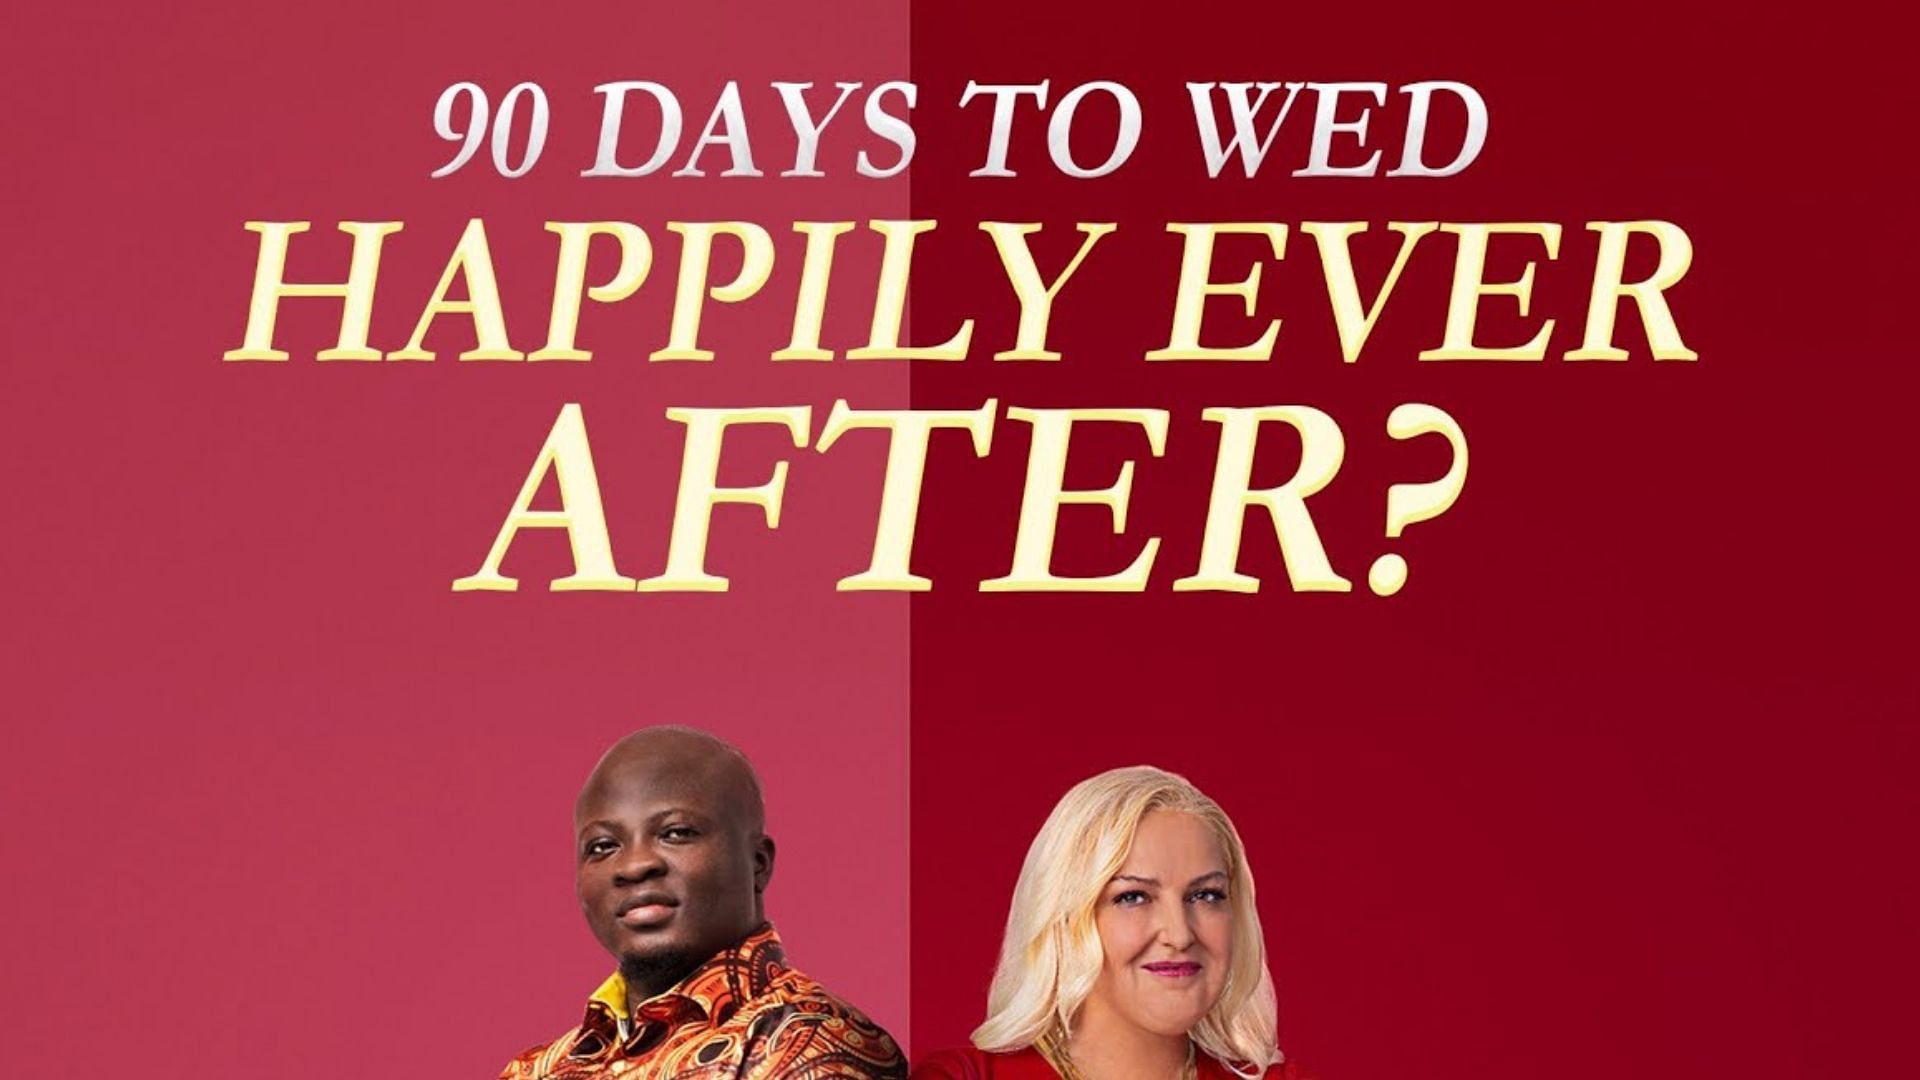 90 Day Fianc&eacute; : Happily Ever After? (Image via TLC)